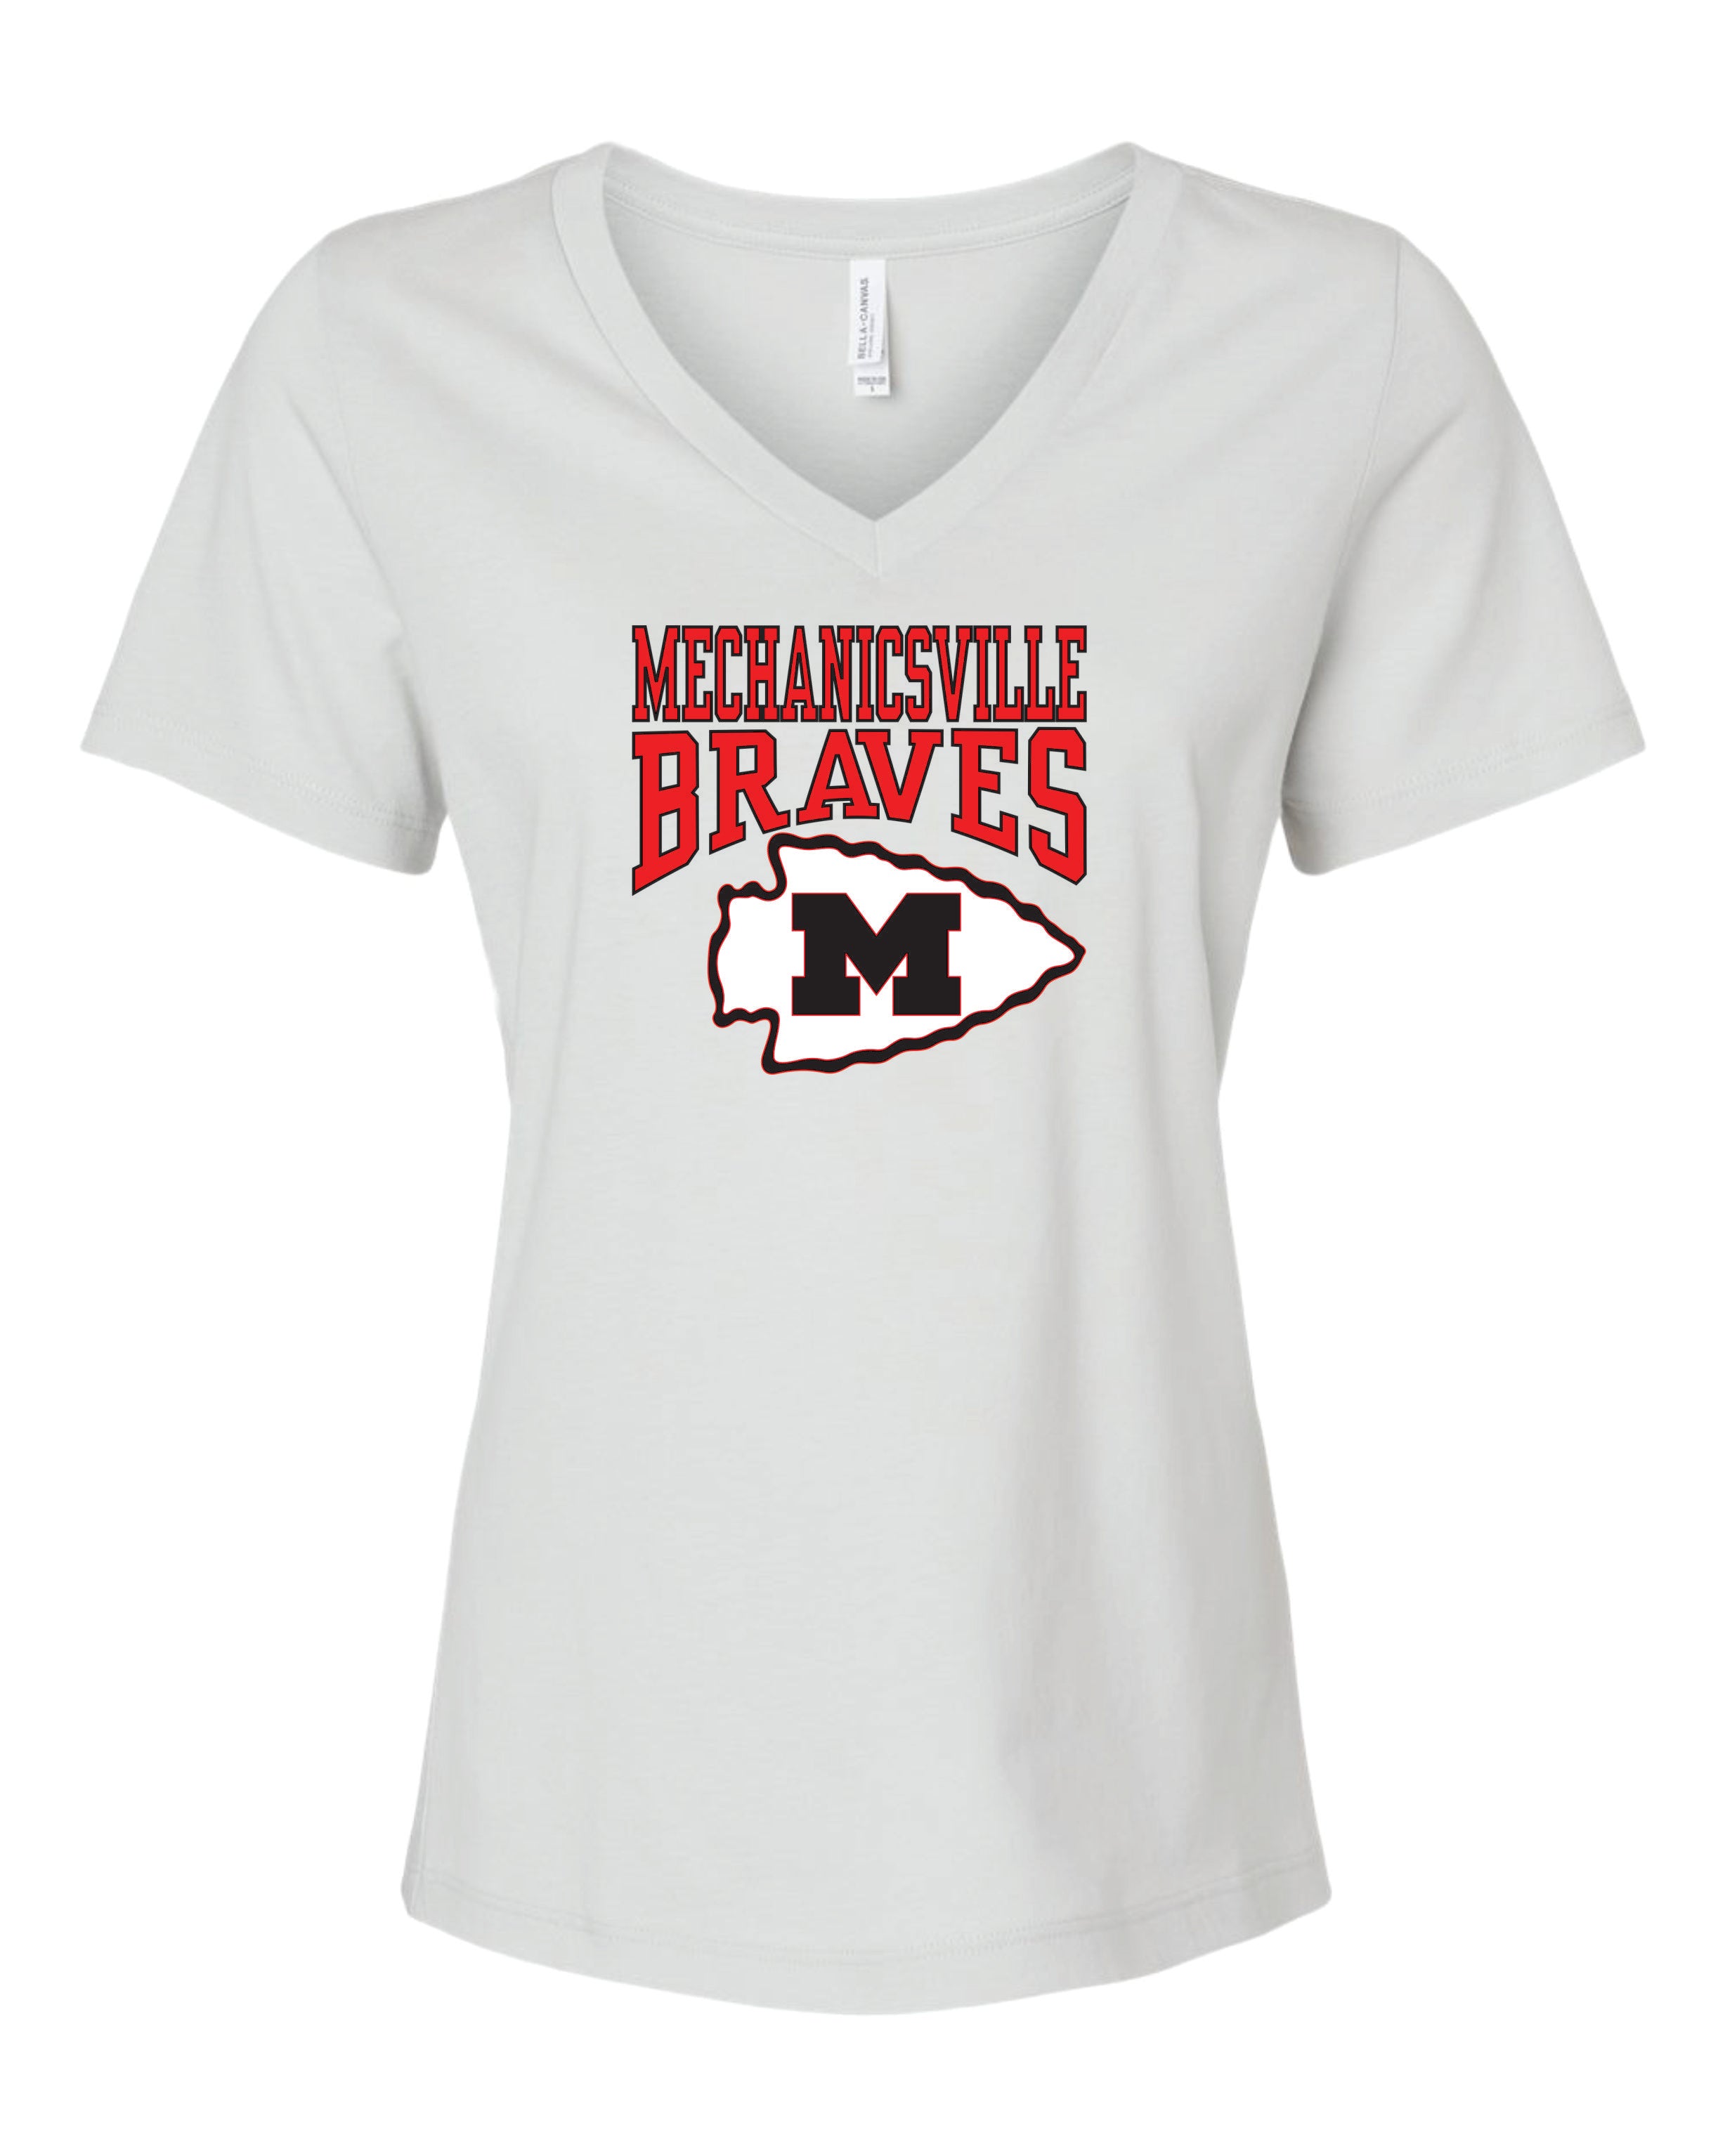 Mechanicsville Braves Women's Bella and Canvas Short Sleeve Relaxed Fit V-Neck